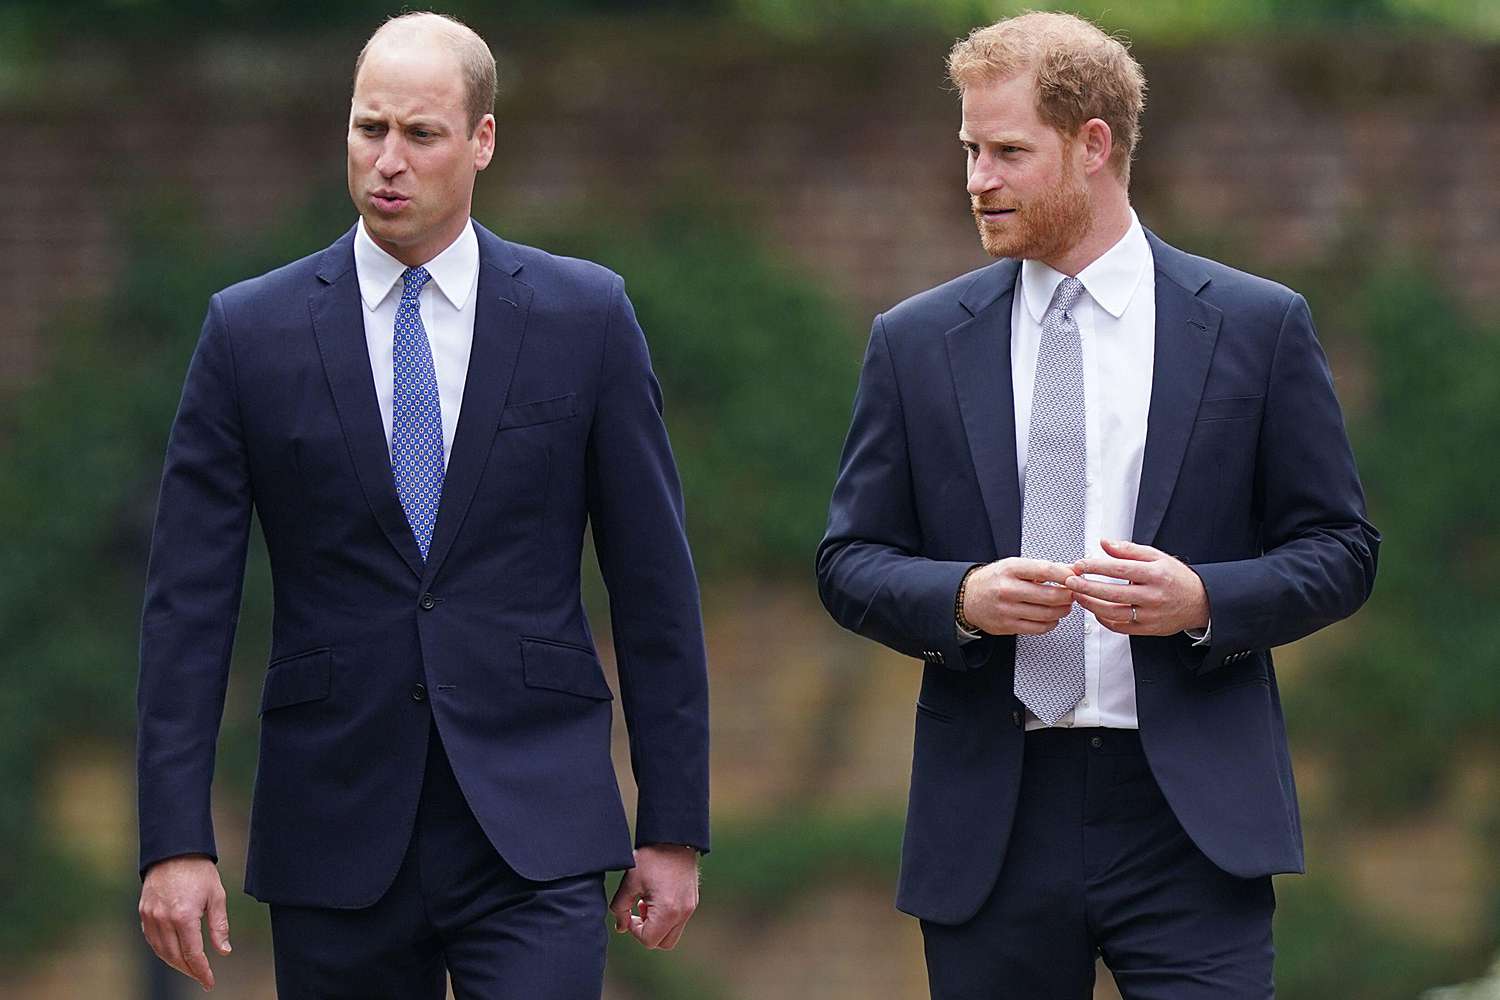 The Duke of Cambridge and Duke of Sussex arrive for the unveiling of a statue they commissioned of their mother Diana, Princess of Wales